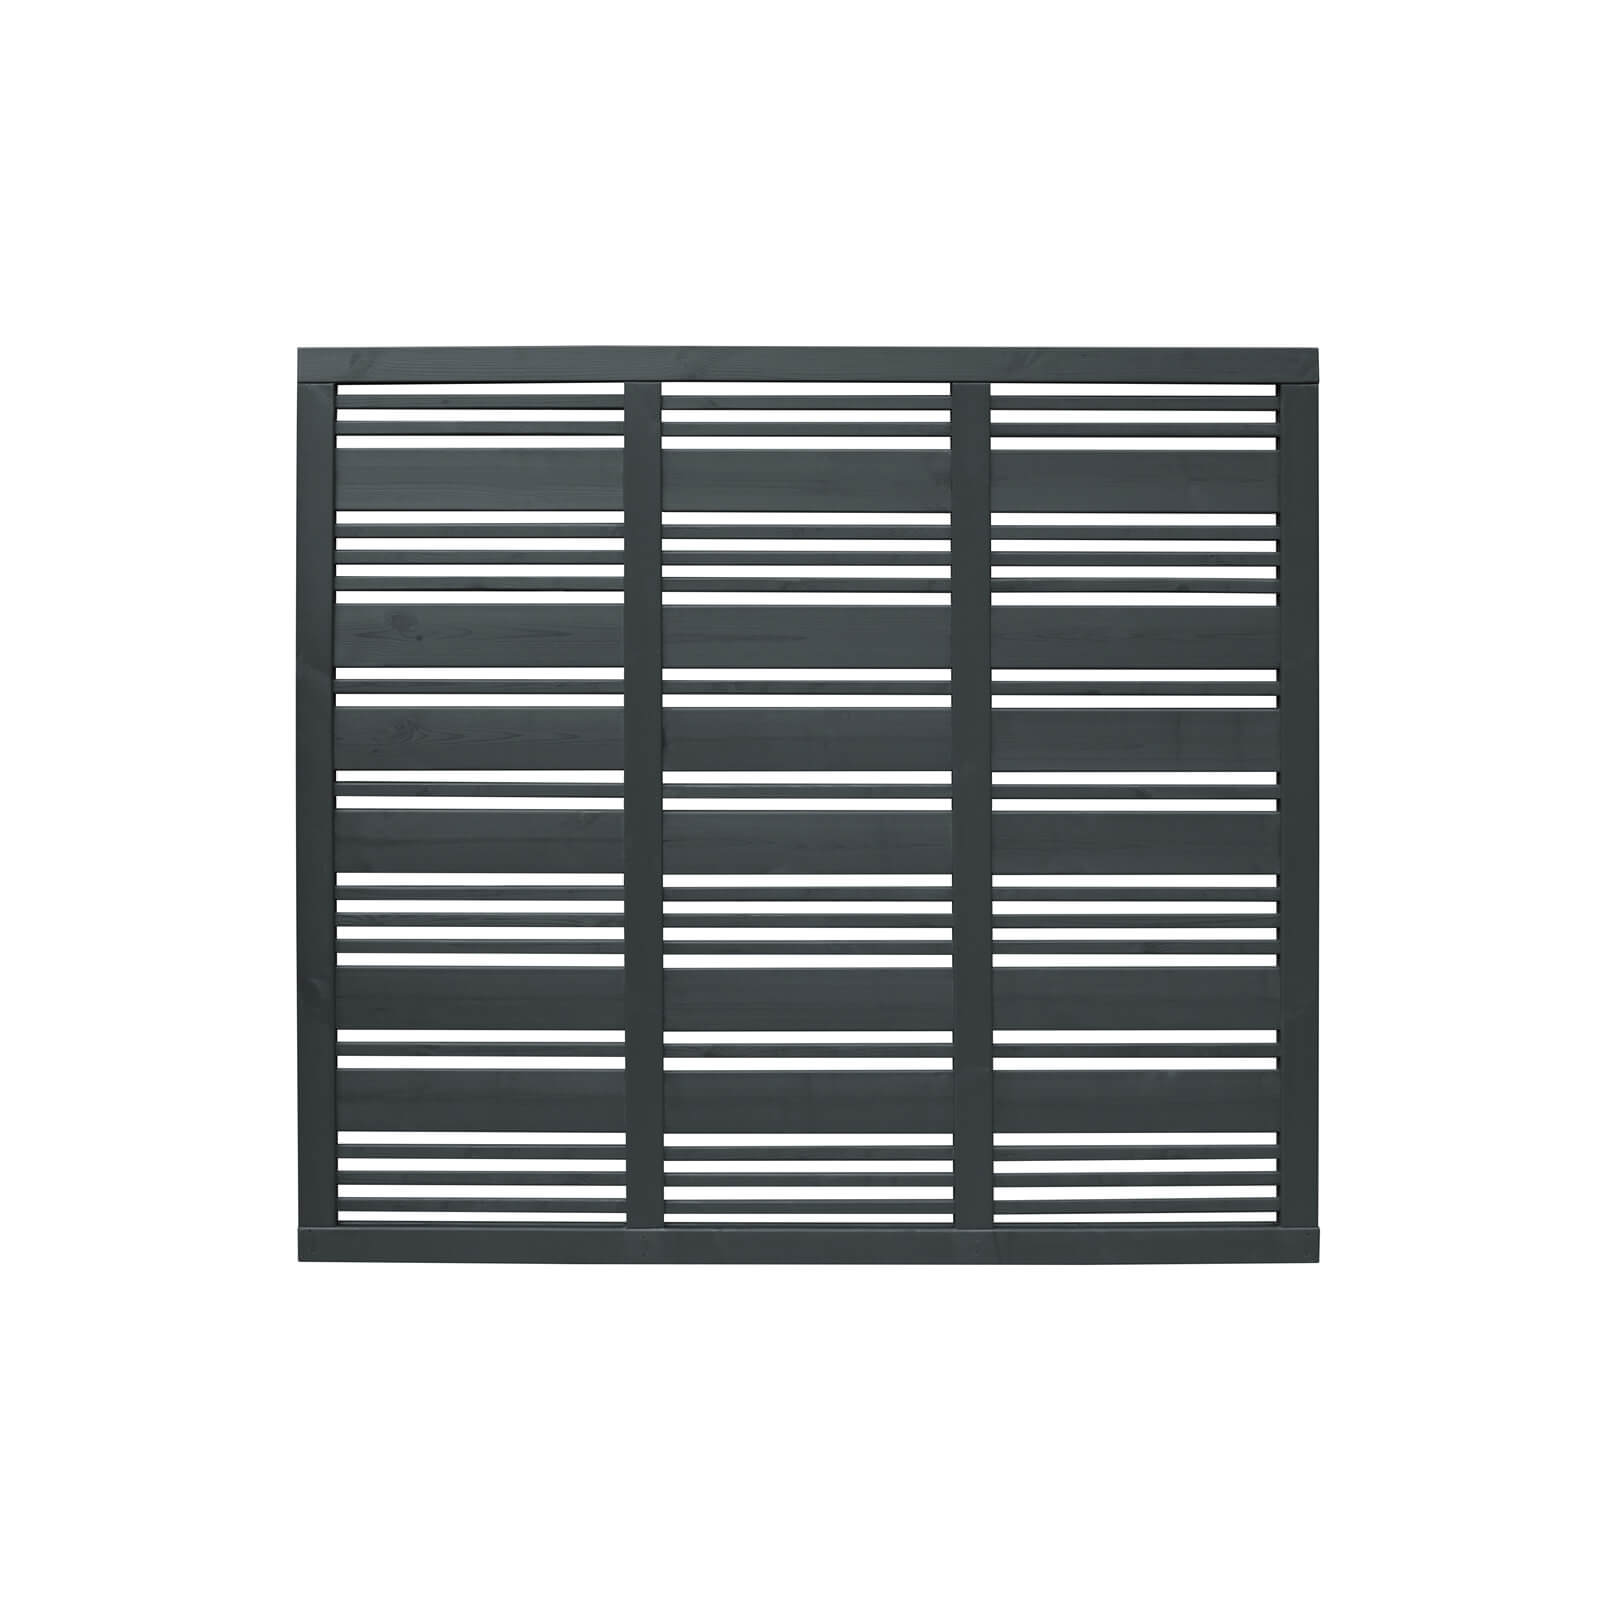 6ft x 6ft (1.8m x 1.8m) Grey Painted Contemporary Mix Slatted Fence Panel - Pack of 4